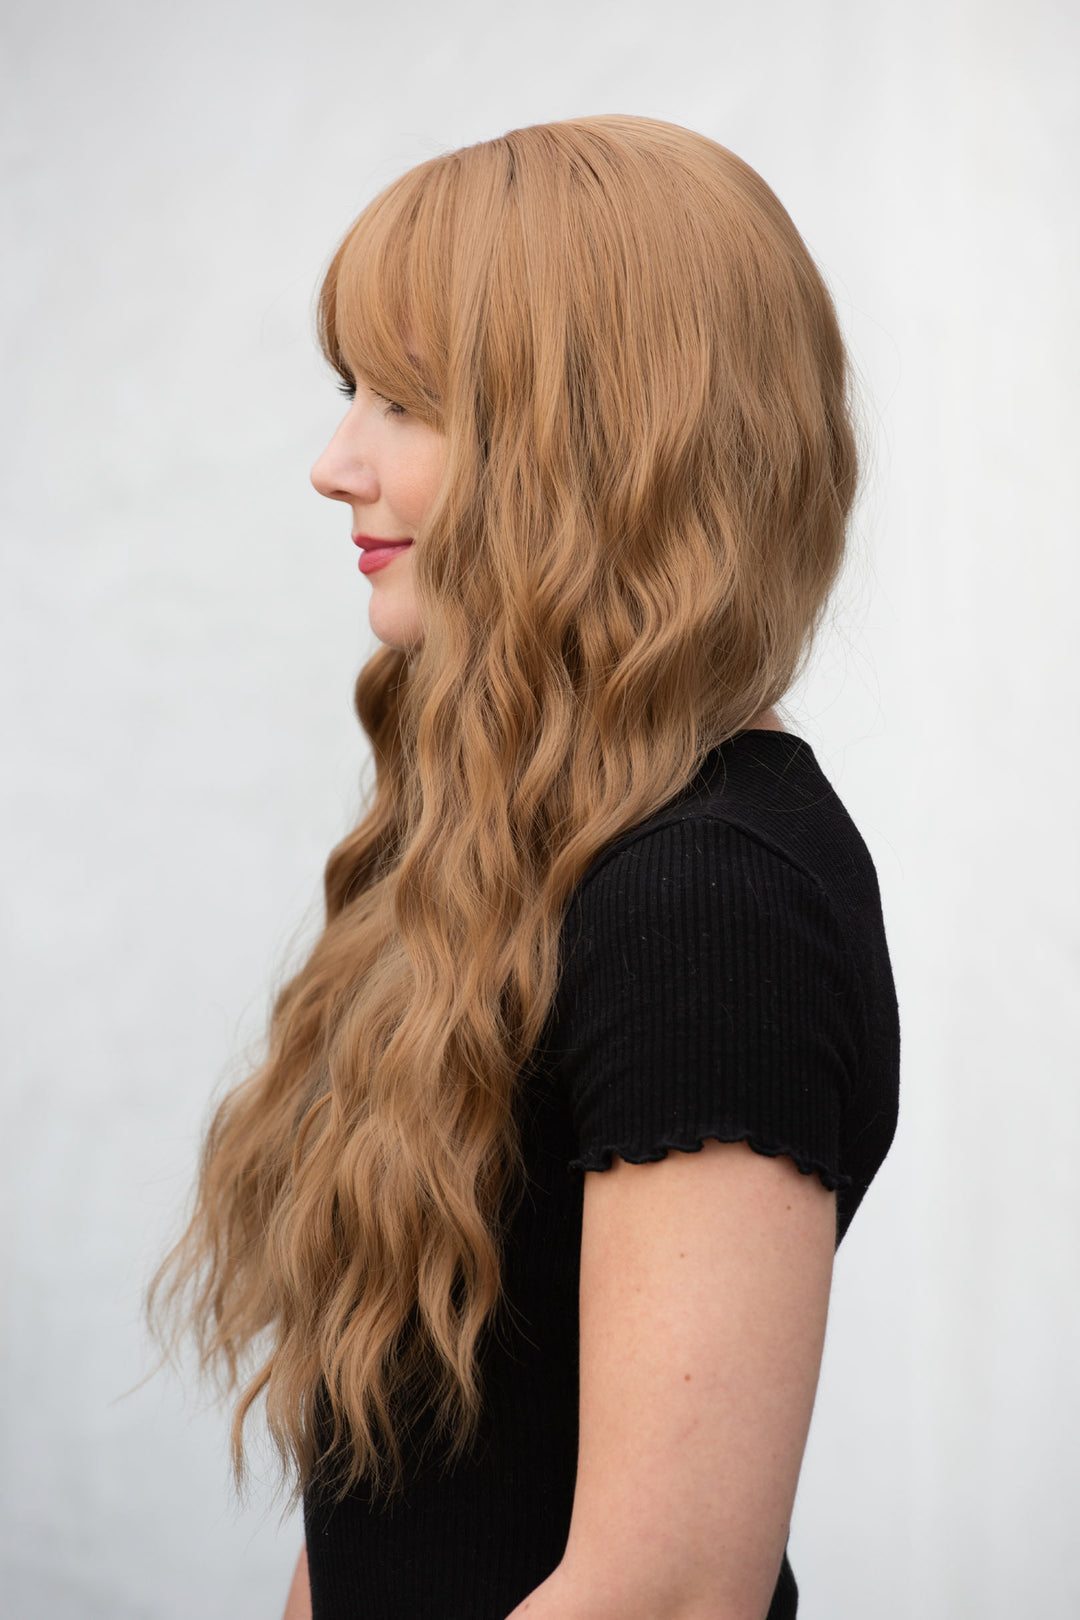 Strawberry Blonde Long Wavy Wig with Bangs | Her Wig Closet | Amelie